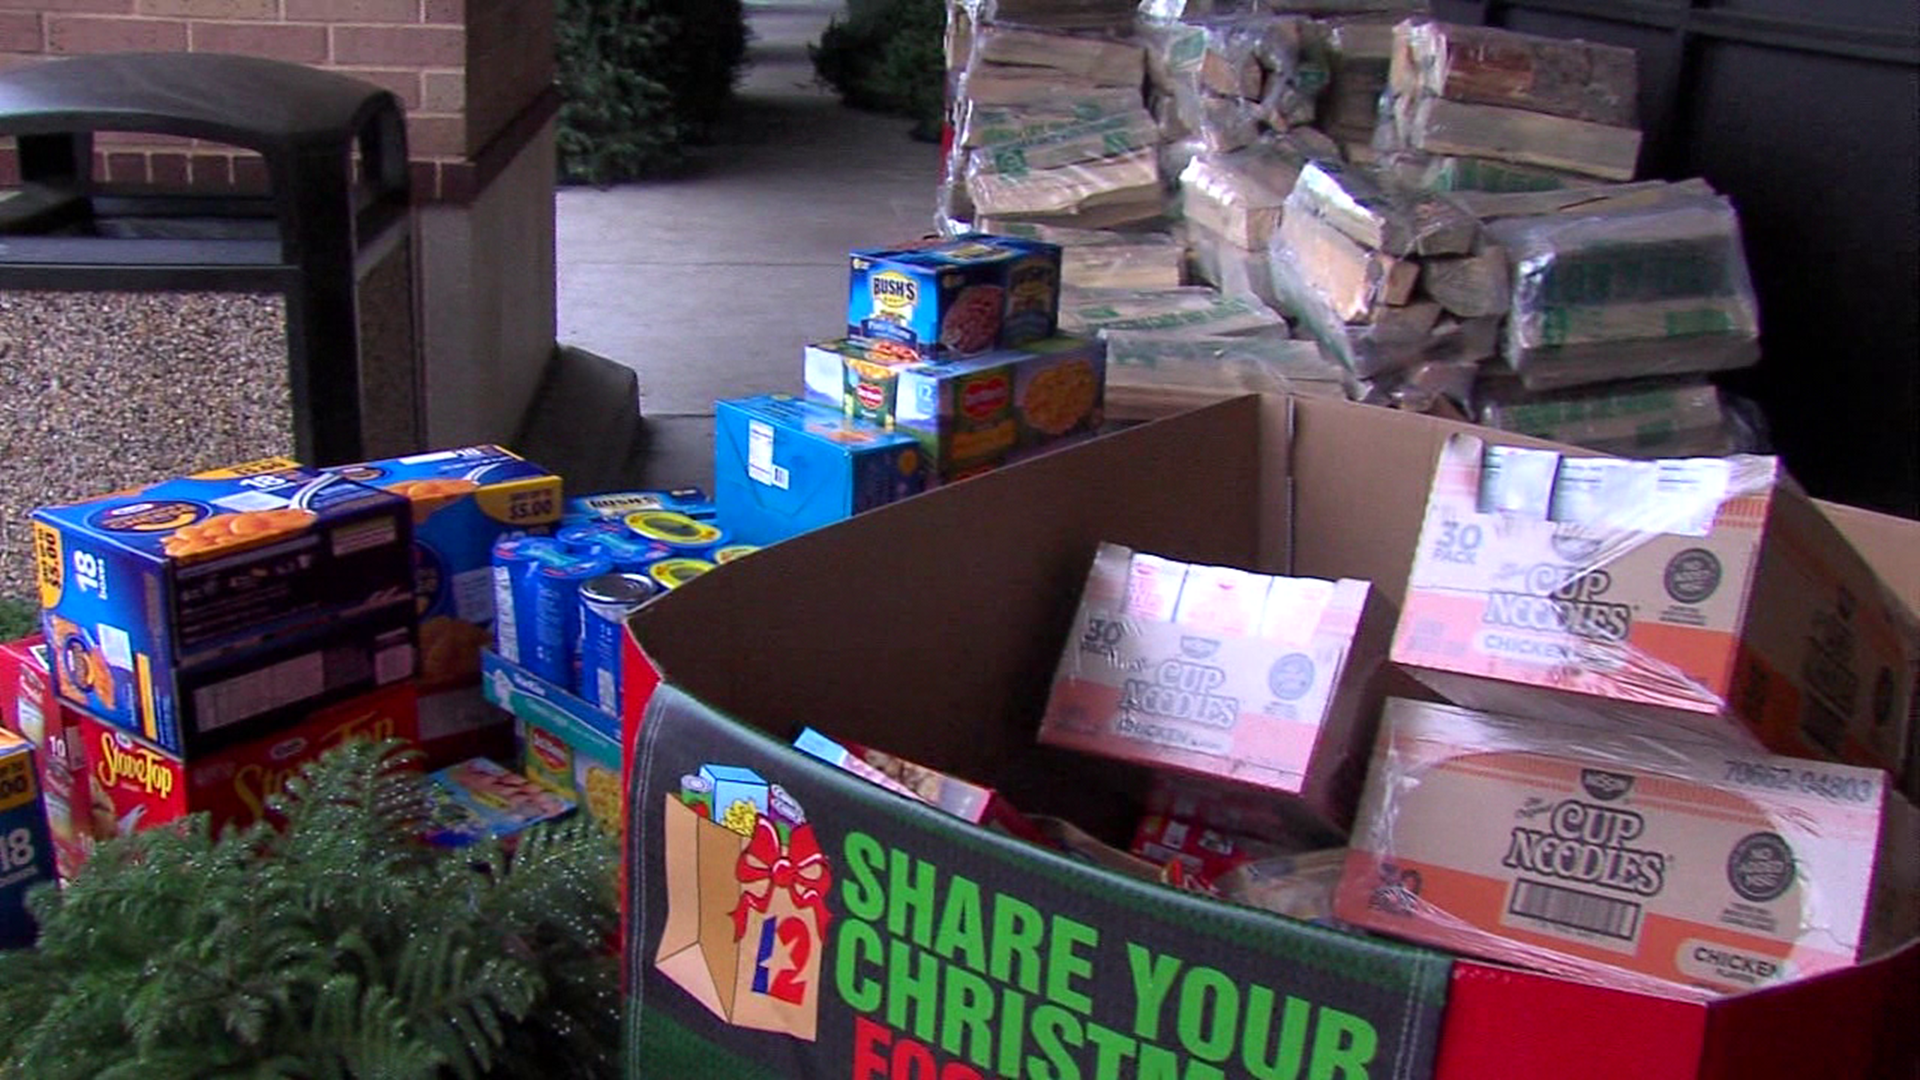 The 24th annual Share Your Christmas Food Drive is the largest food drive of the year benefitting the food bank.